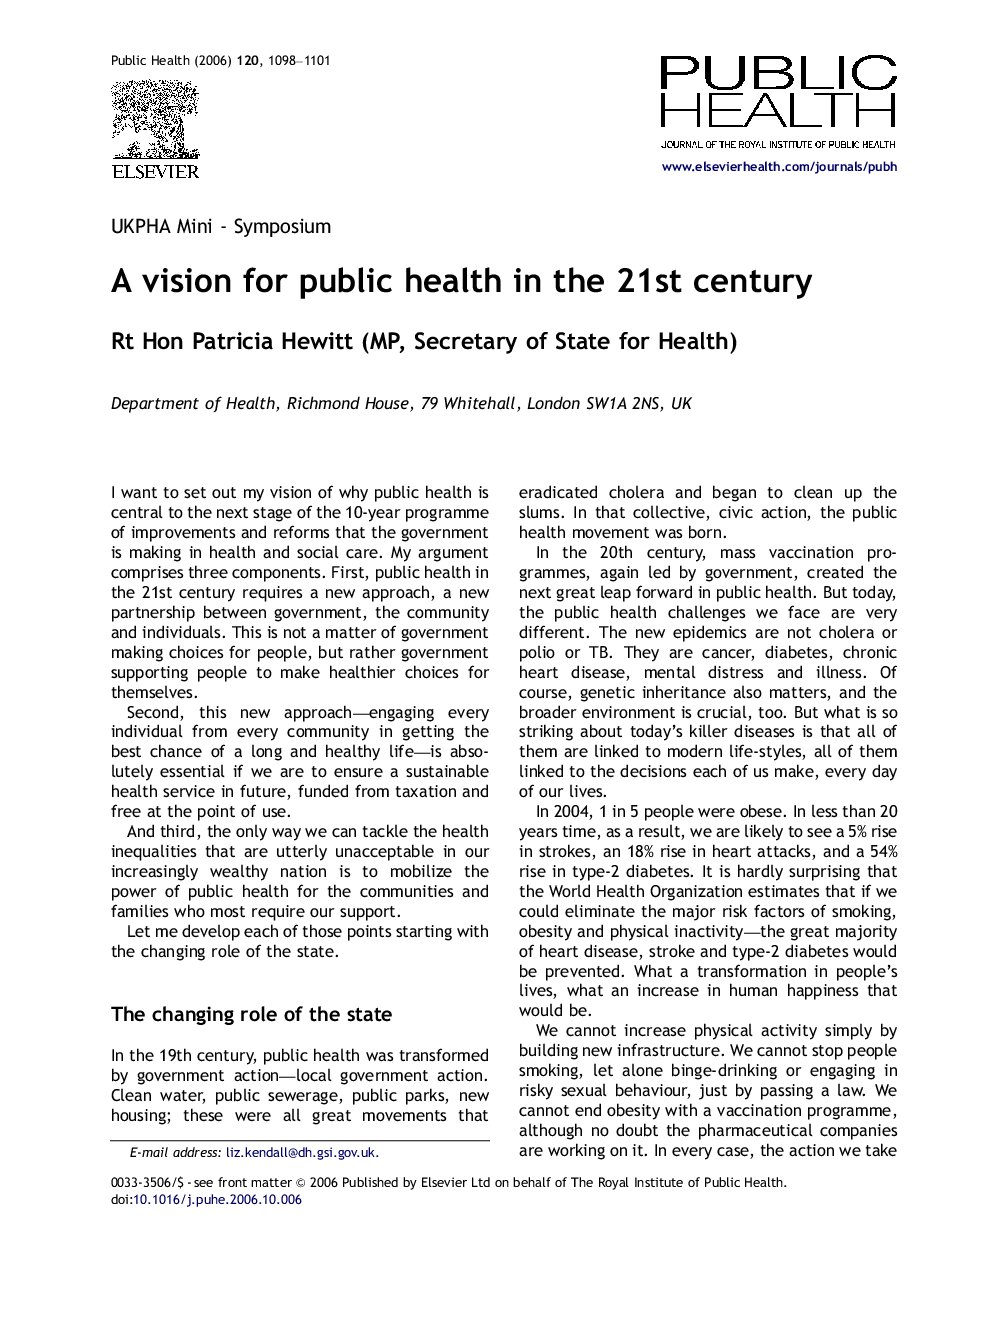 A vision for public health in the 21st century